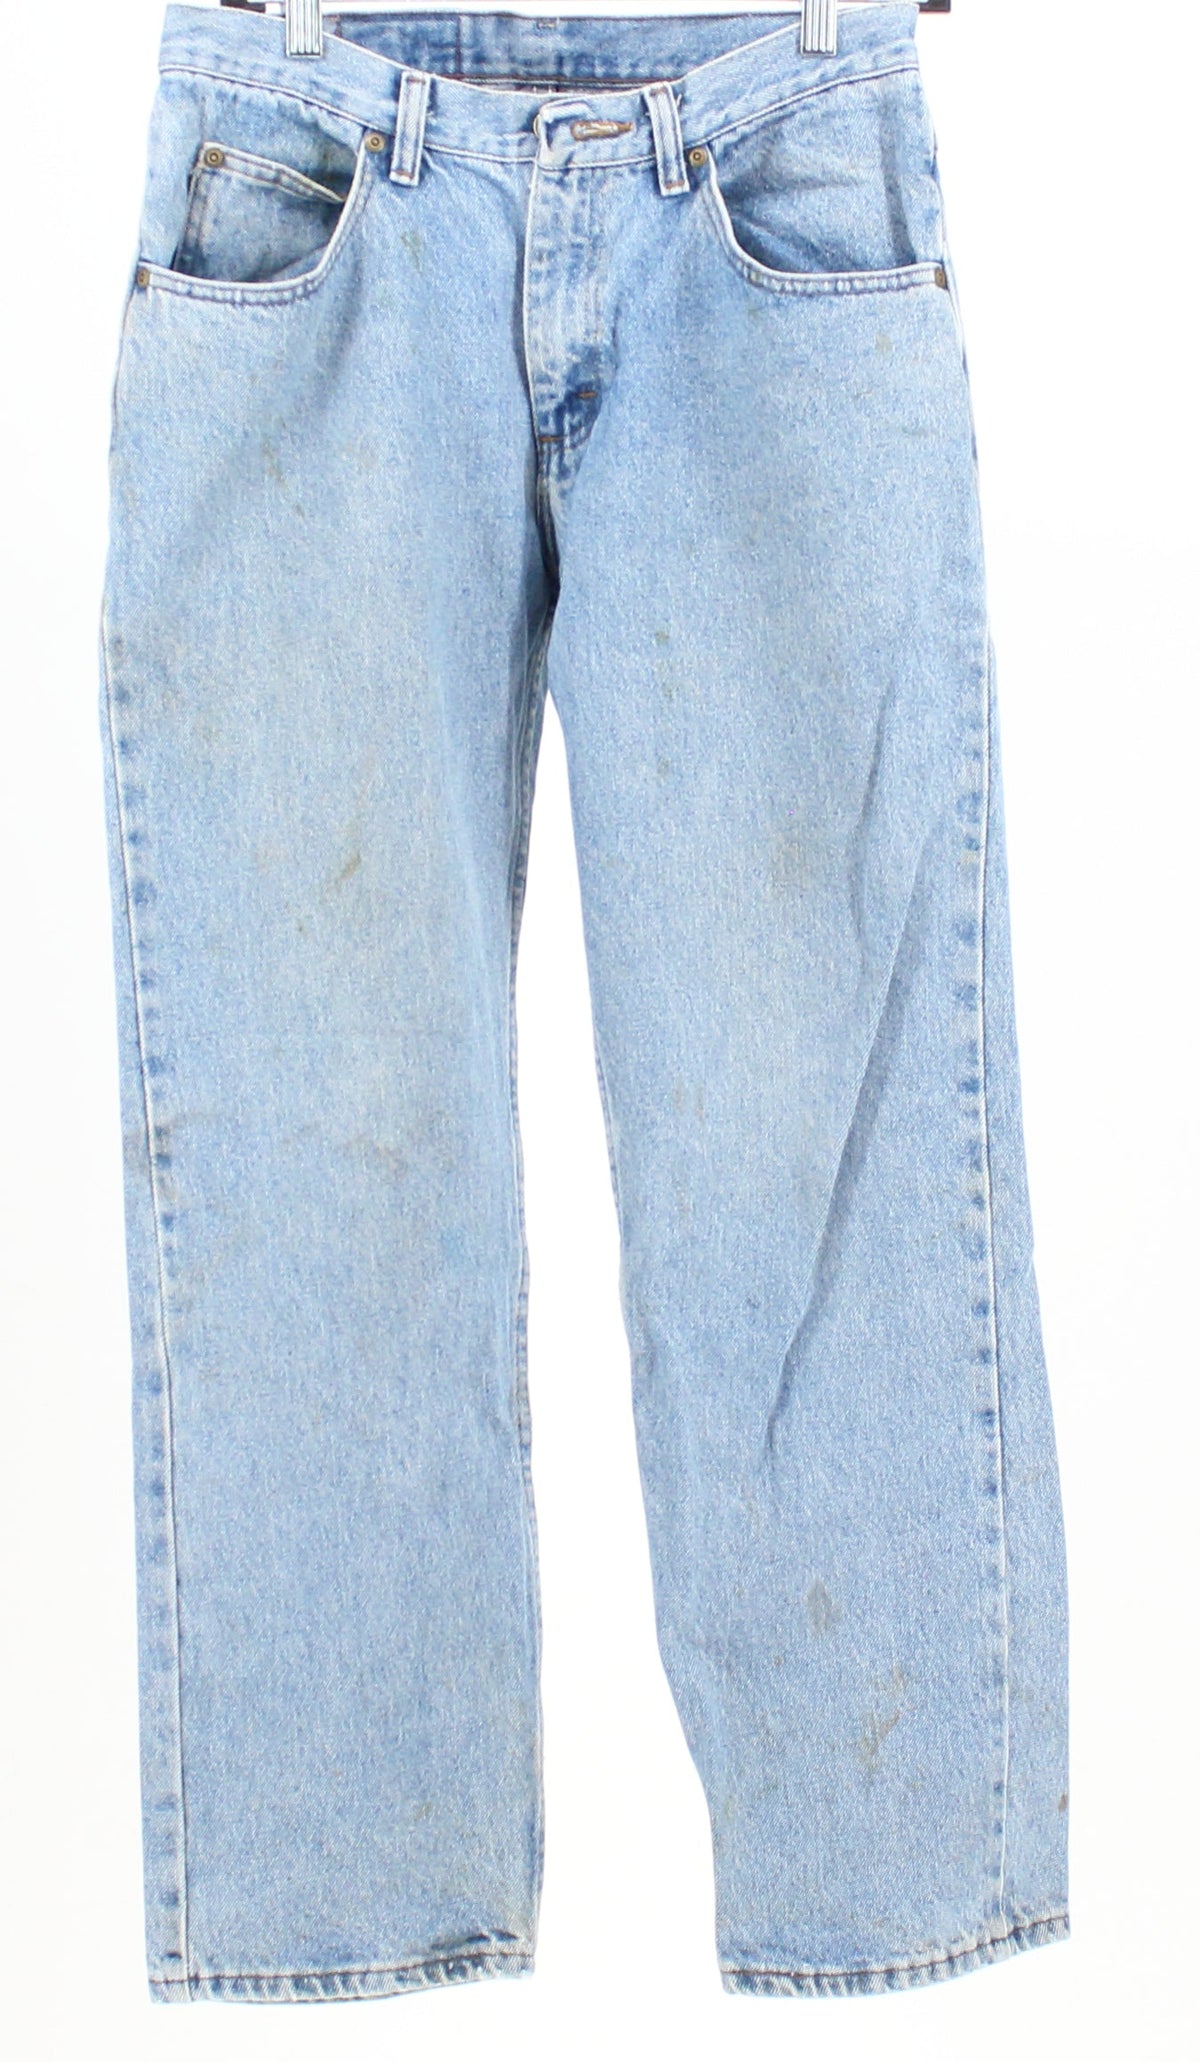 Riders by Lee Straight Leg Light Wash Jeans